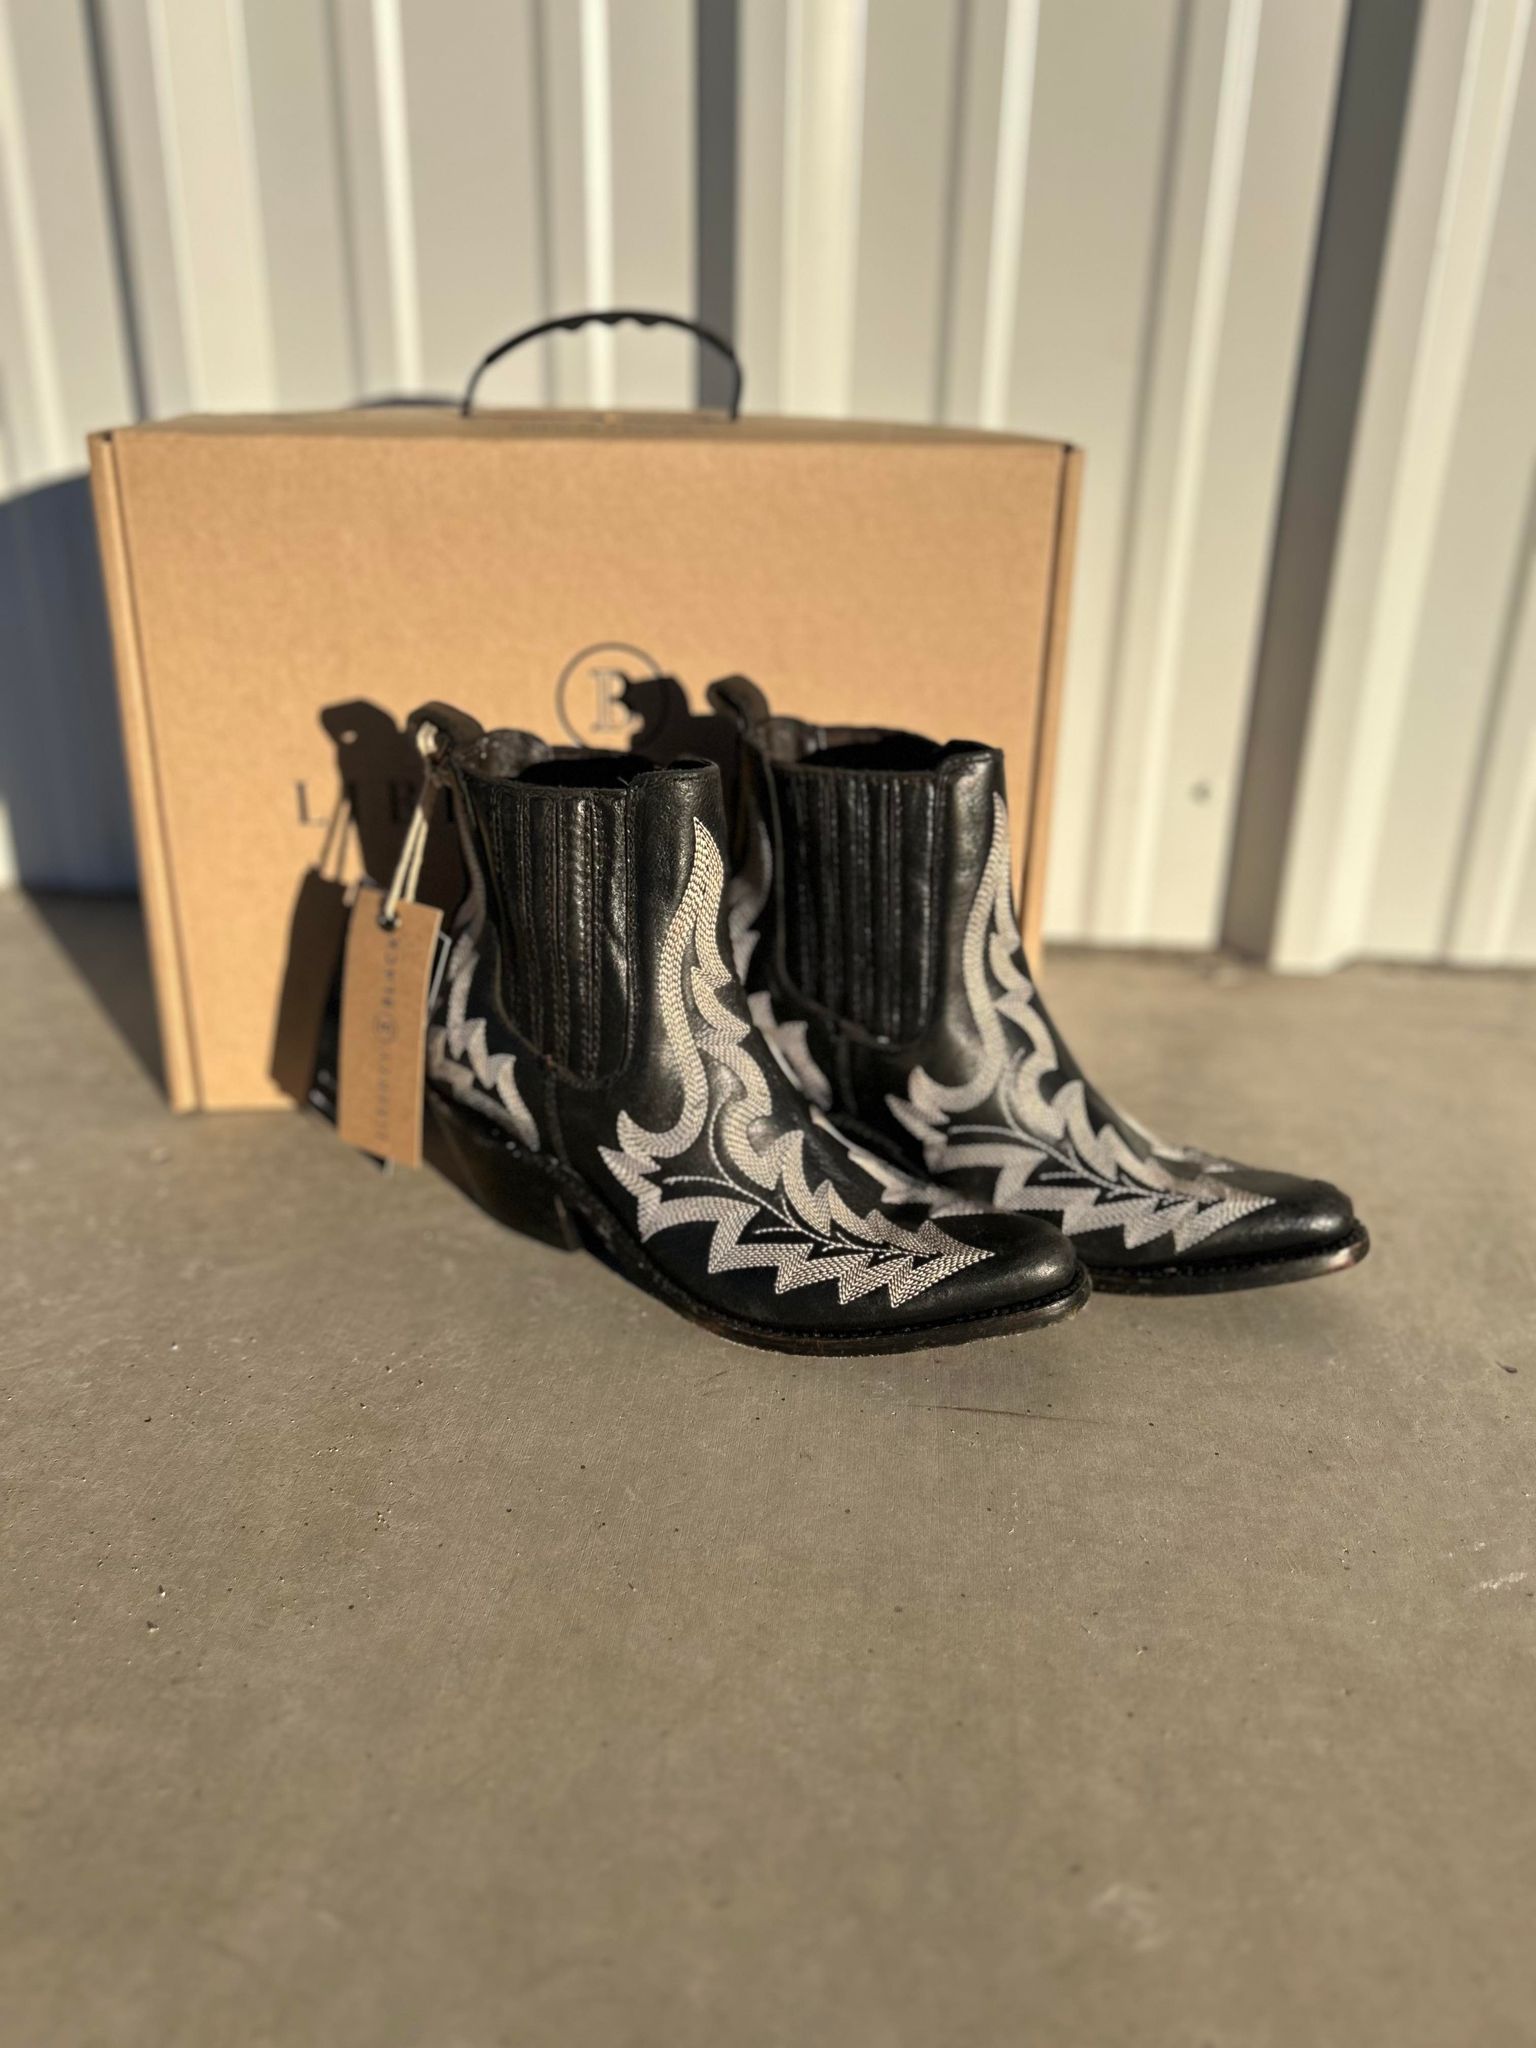 Liberty Black Simone Bootie in Mossil Negro-Women's Booties-Liberty Black-Lucky J Boots & More, Women's, Men's, & Kids Western Store Located in Carthage, MO